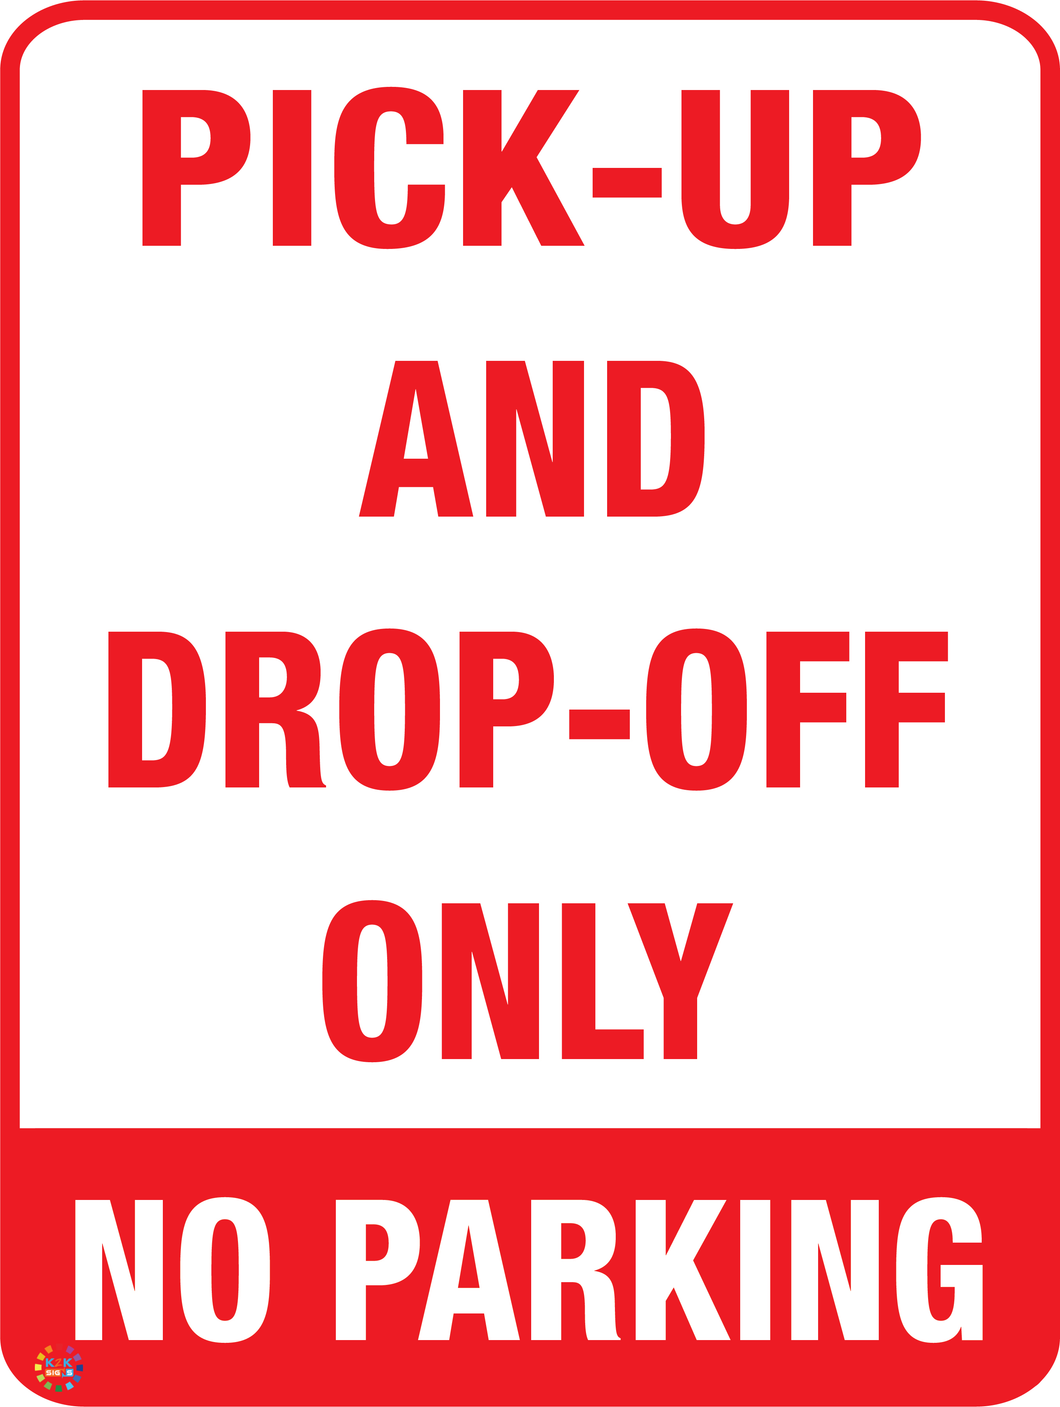 Pick Up and Drop Off Only Sign